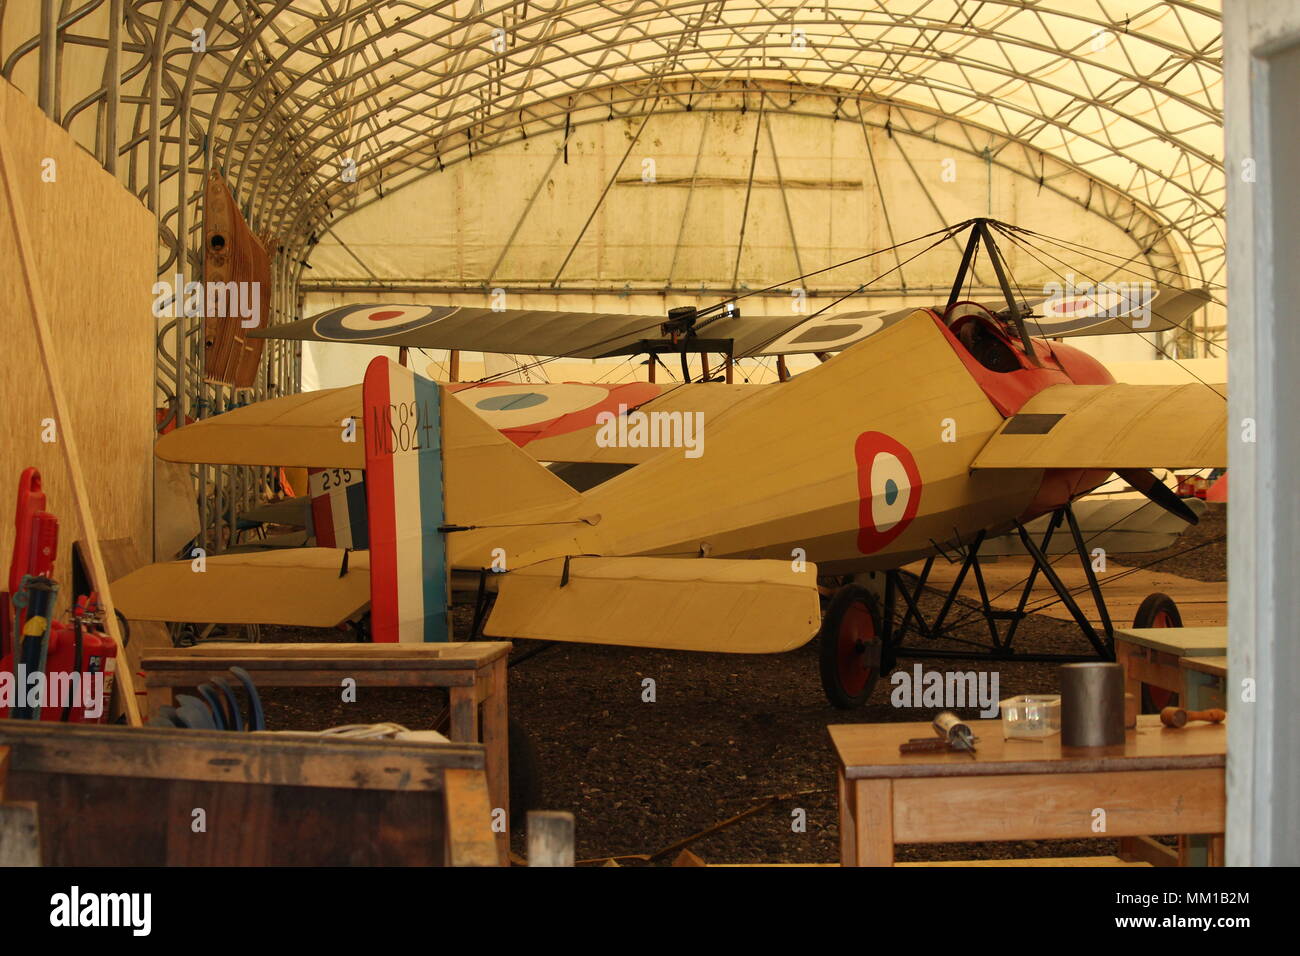 British Military Heritage - Interior of private aircraft hangar at the WW1 Great War Aerodrome, Stow Maries, Purleigh, Essex. Stock Photo